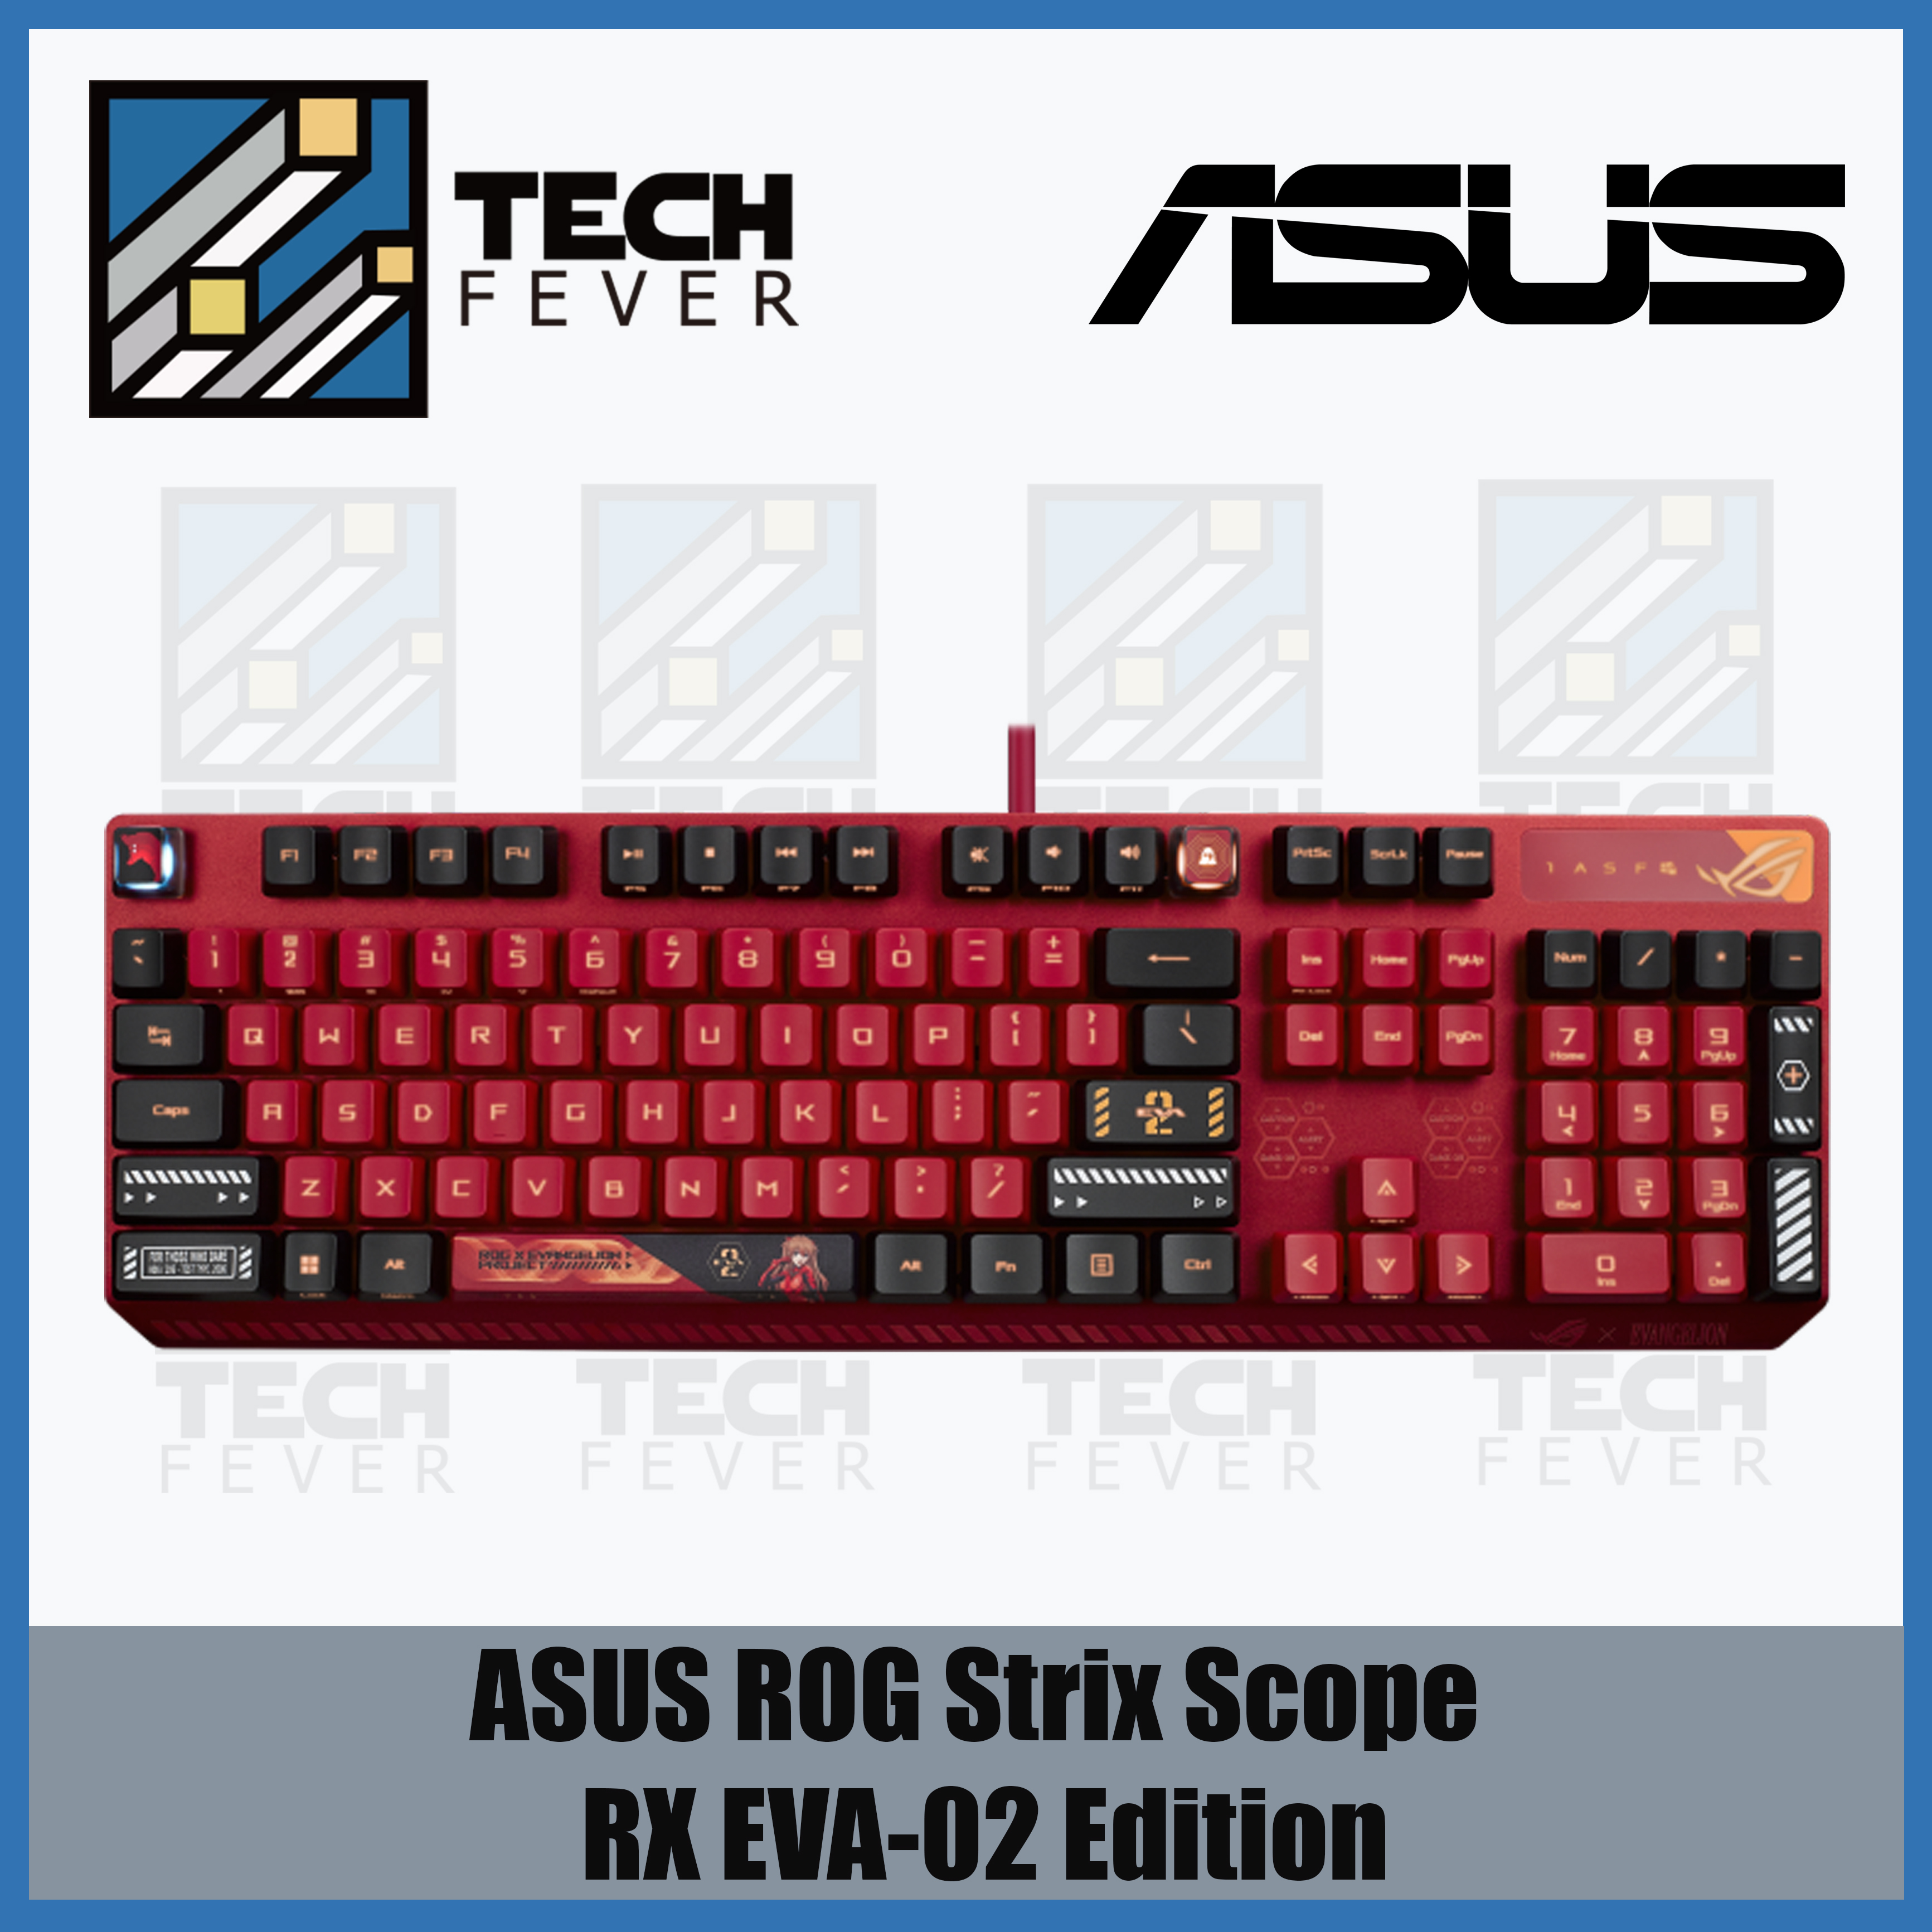 ASUS ROG Strix Scope RX EVA-02 Edition, 100% RGB Gaming Keyboard, ROG RX  Red Optical Mechanical Switches, IP57 Water Resistance, USB Passthrough